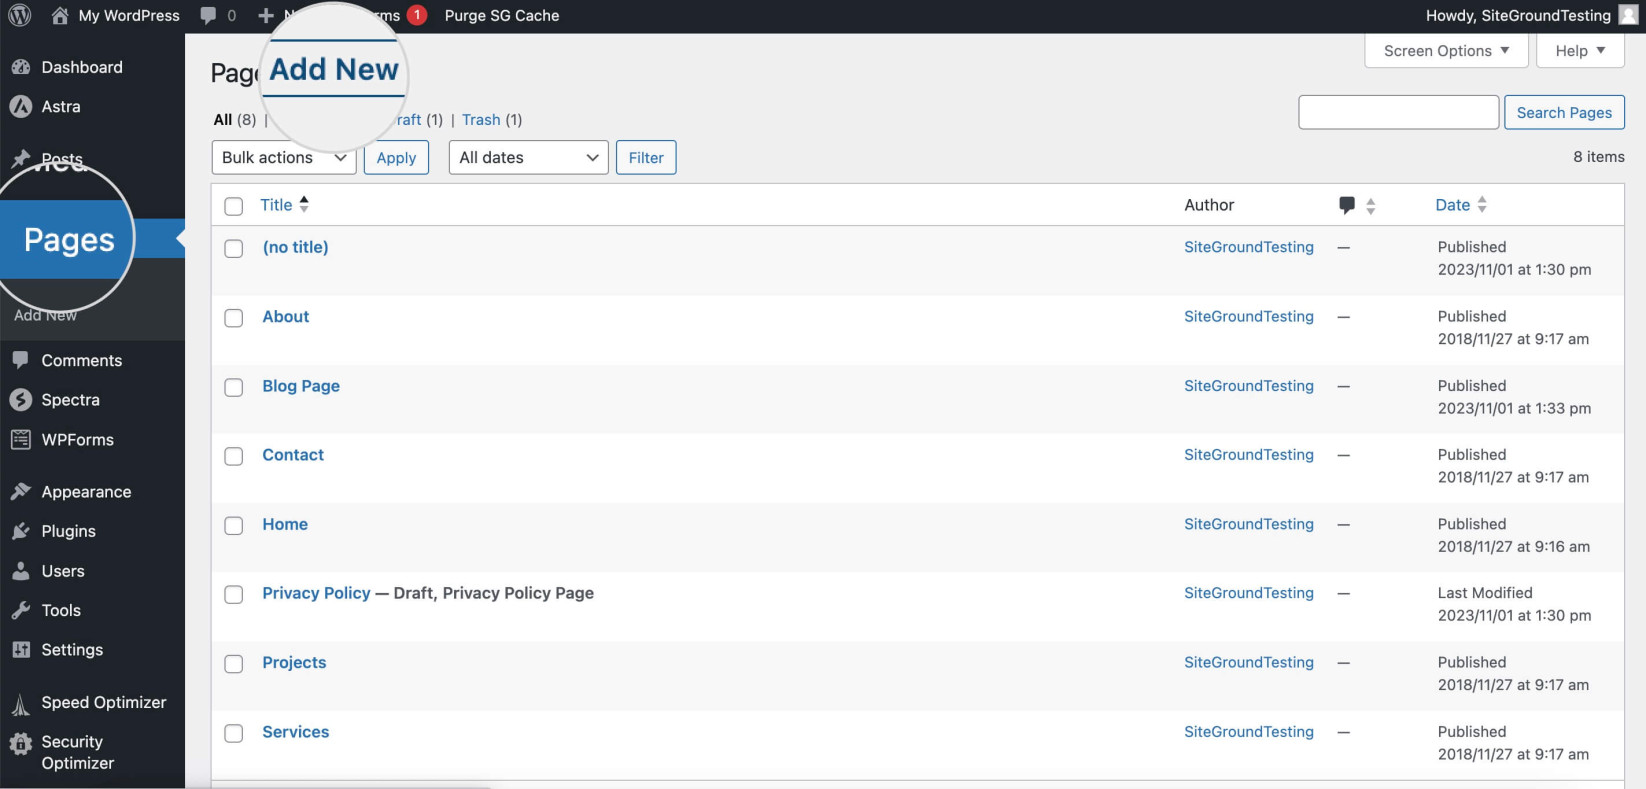 Screenshot showing how to add a new Page in WordPress